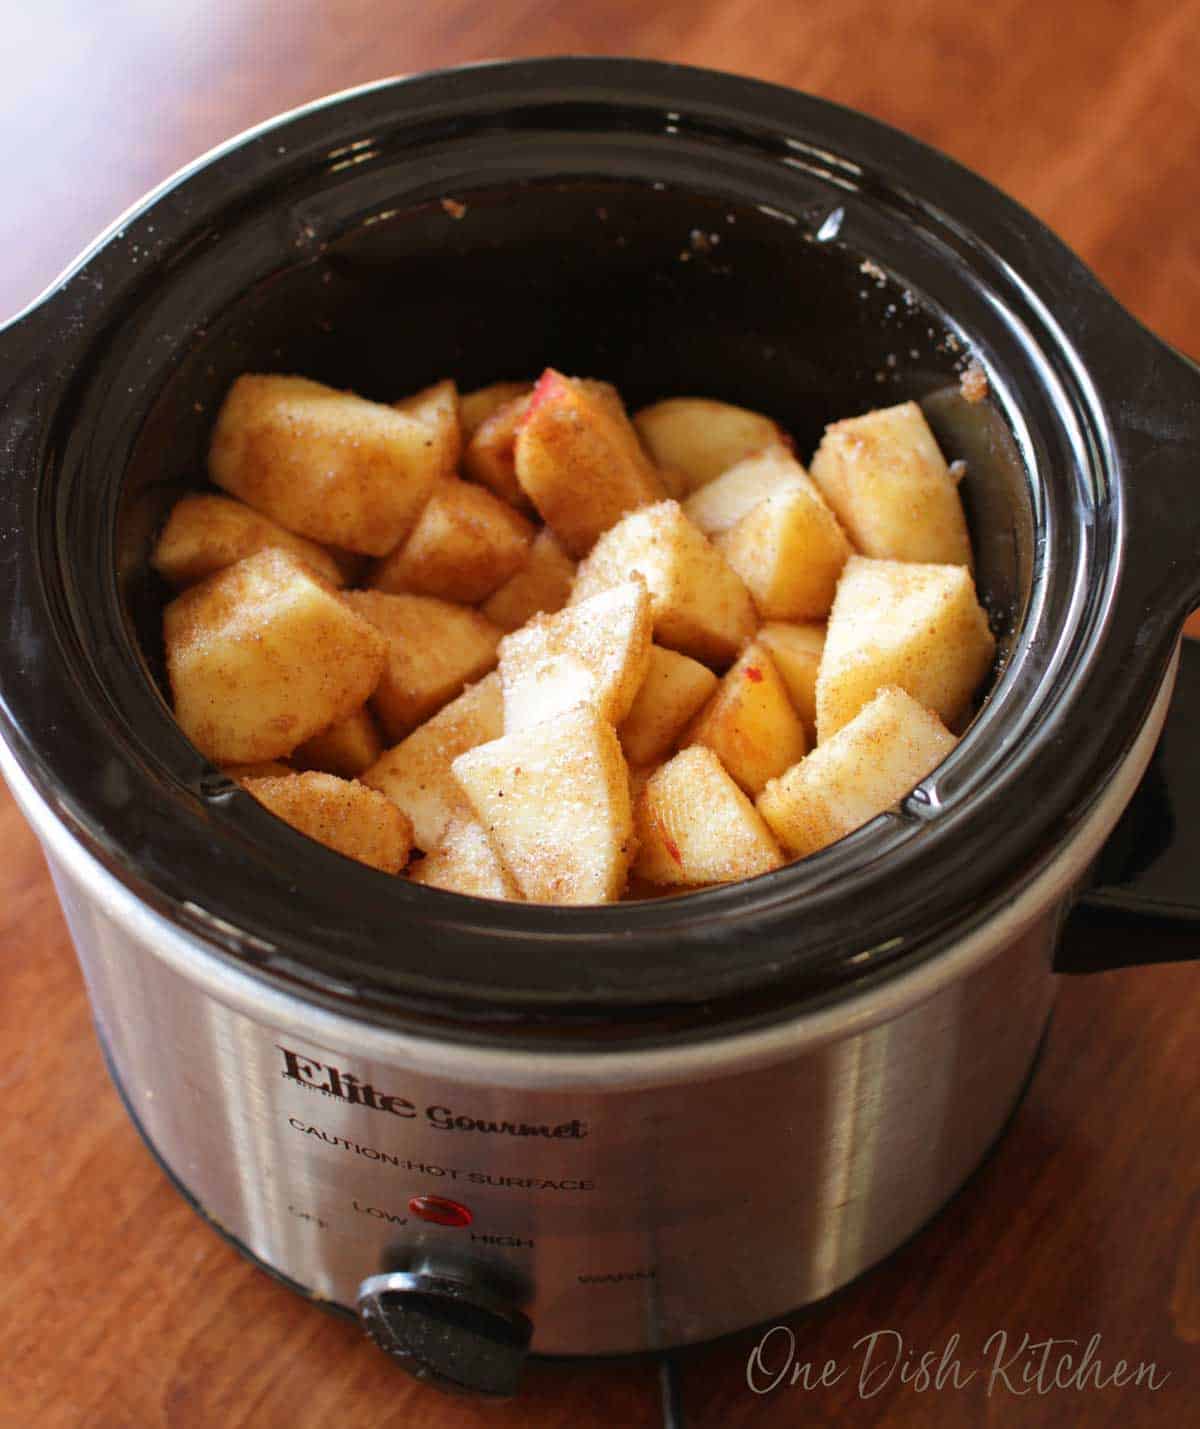 Sliced apples in a slow cooker.